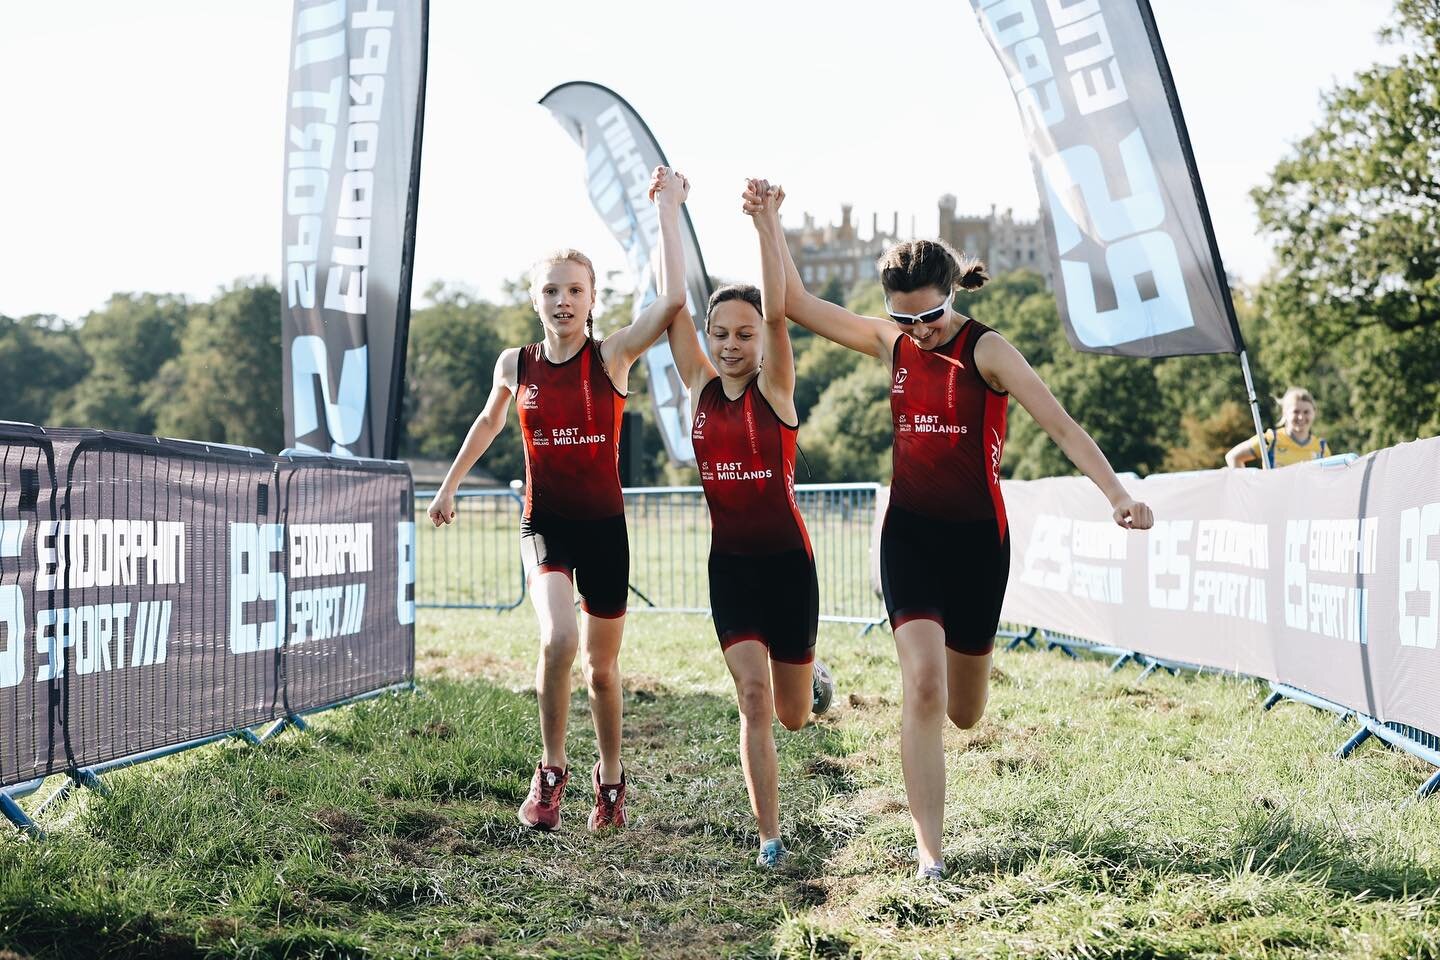 ✨Whoop!!! Uppingham Pool Sprint Triathlon and Kids Aquathlon 5th May 2024 is NOW LIVE ✨👊🏼 Thank you for all the entries already&hellip;🙏 Early bird until 31st Dec 23 

📣 Please note for 2024 initially we are capping numbers at 300 for the Adults 